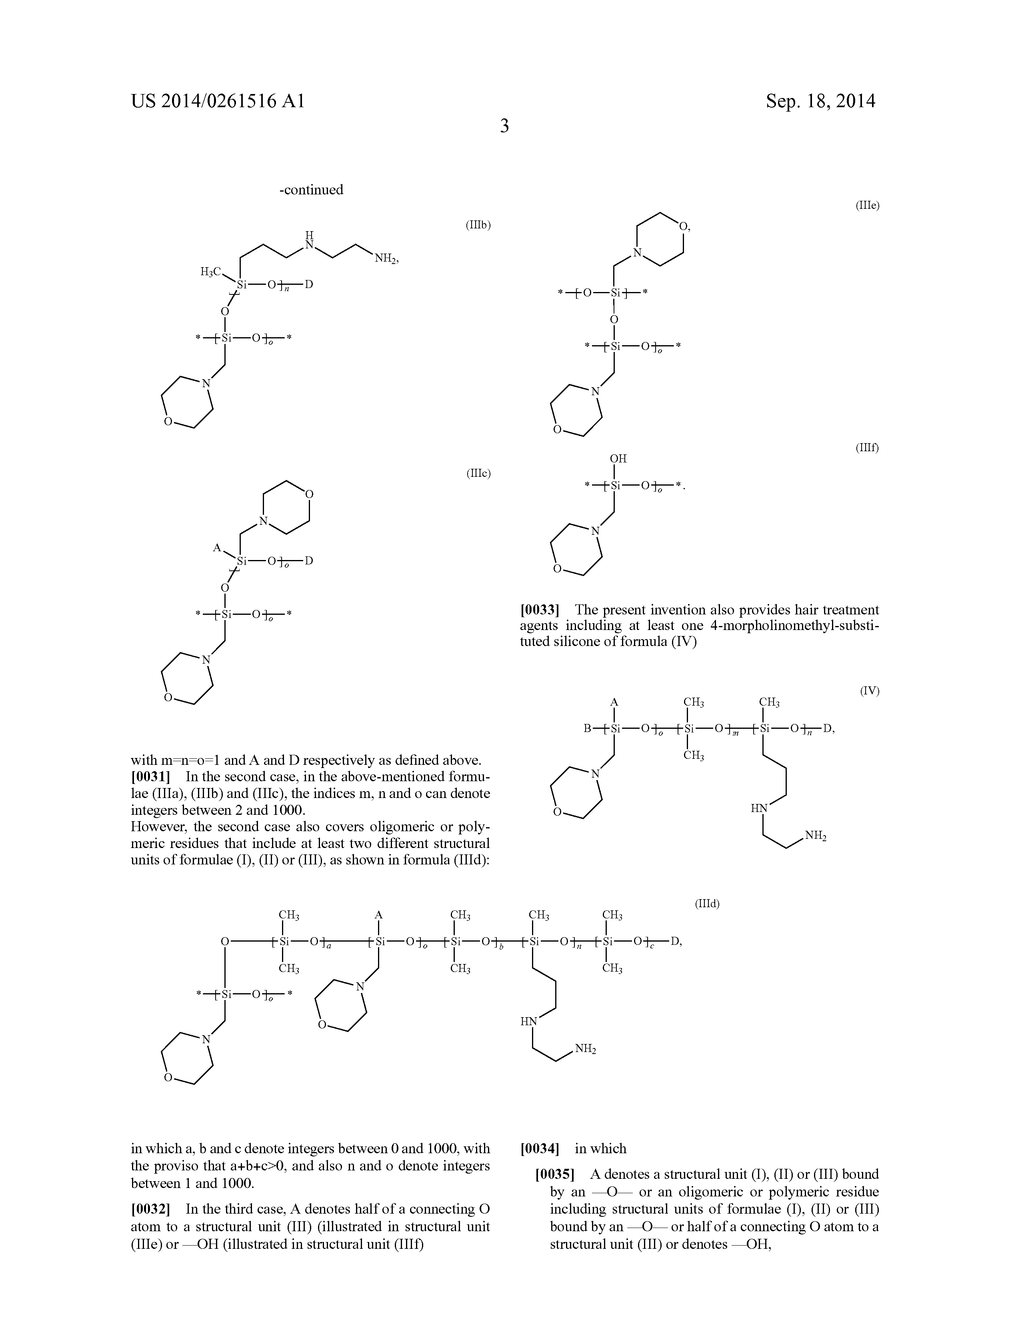 HAIR TREATMENT AGENT COMPRISING 4-MORPHOLINO-METHYL-SUBSTITUTED     SILICONE(S) - diagram, schematic, and image 04